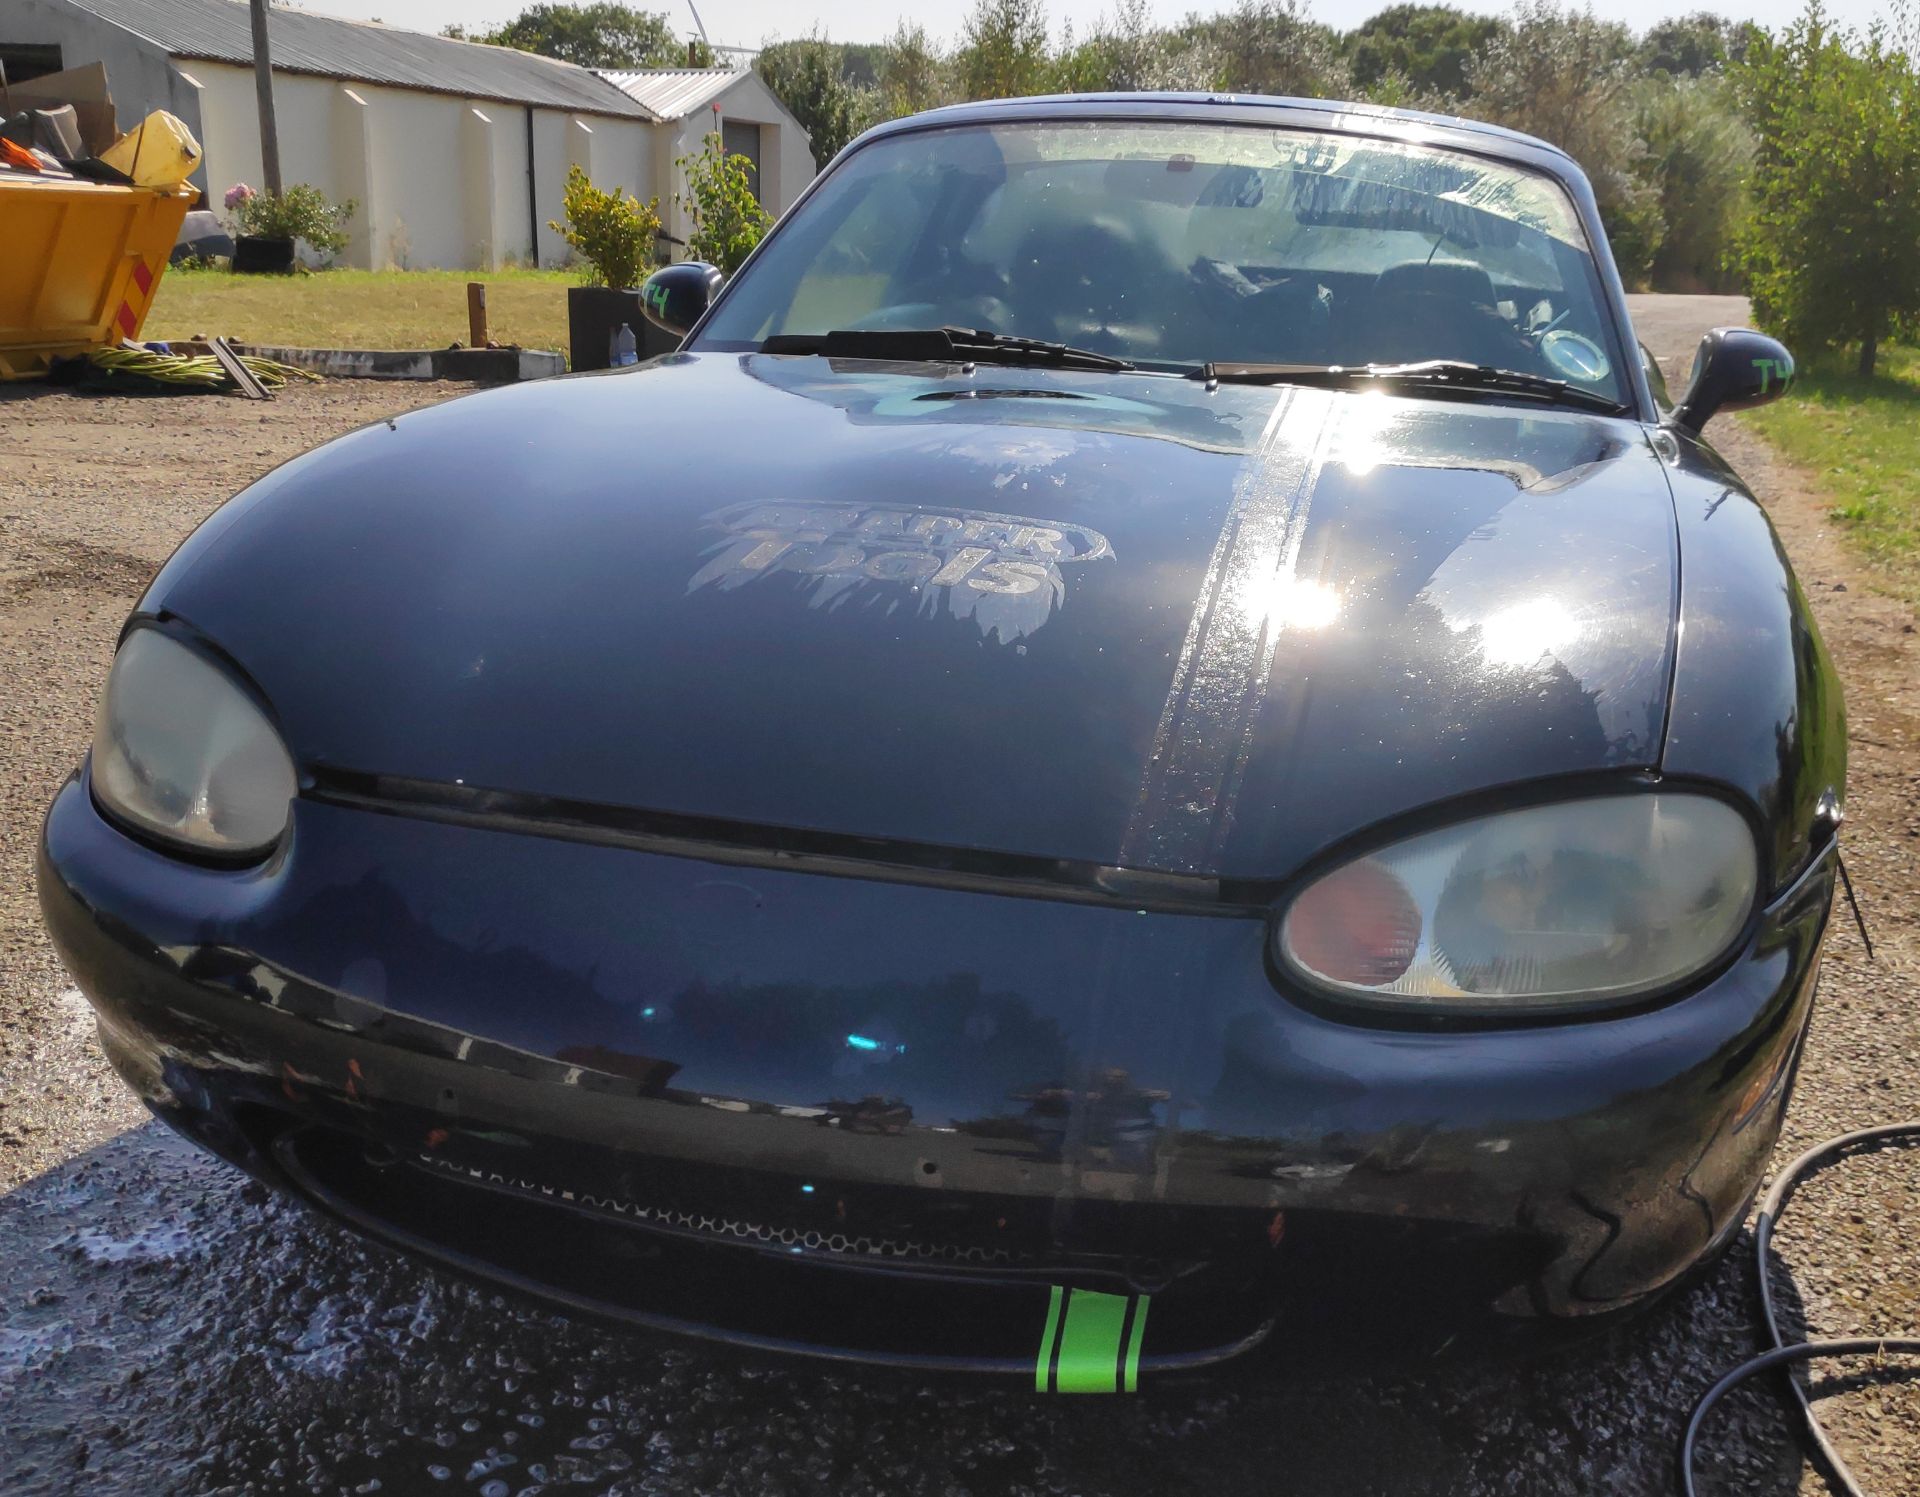 1 x 2000 Mazda MX5 Mk2 Drift Car - Includes 3 Extra Wheels/Tyres - Ref: T4 - CL682 - Location: Bedfo